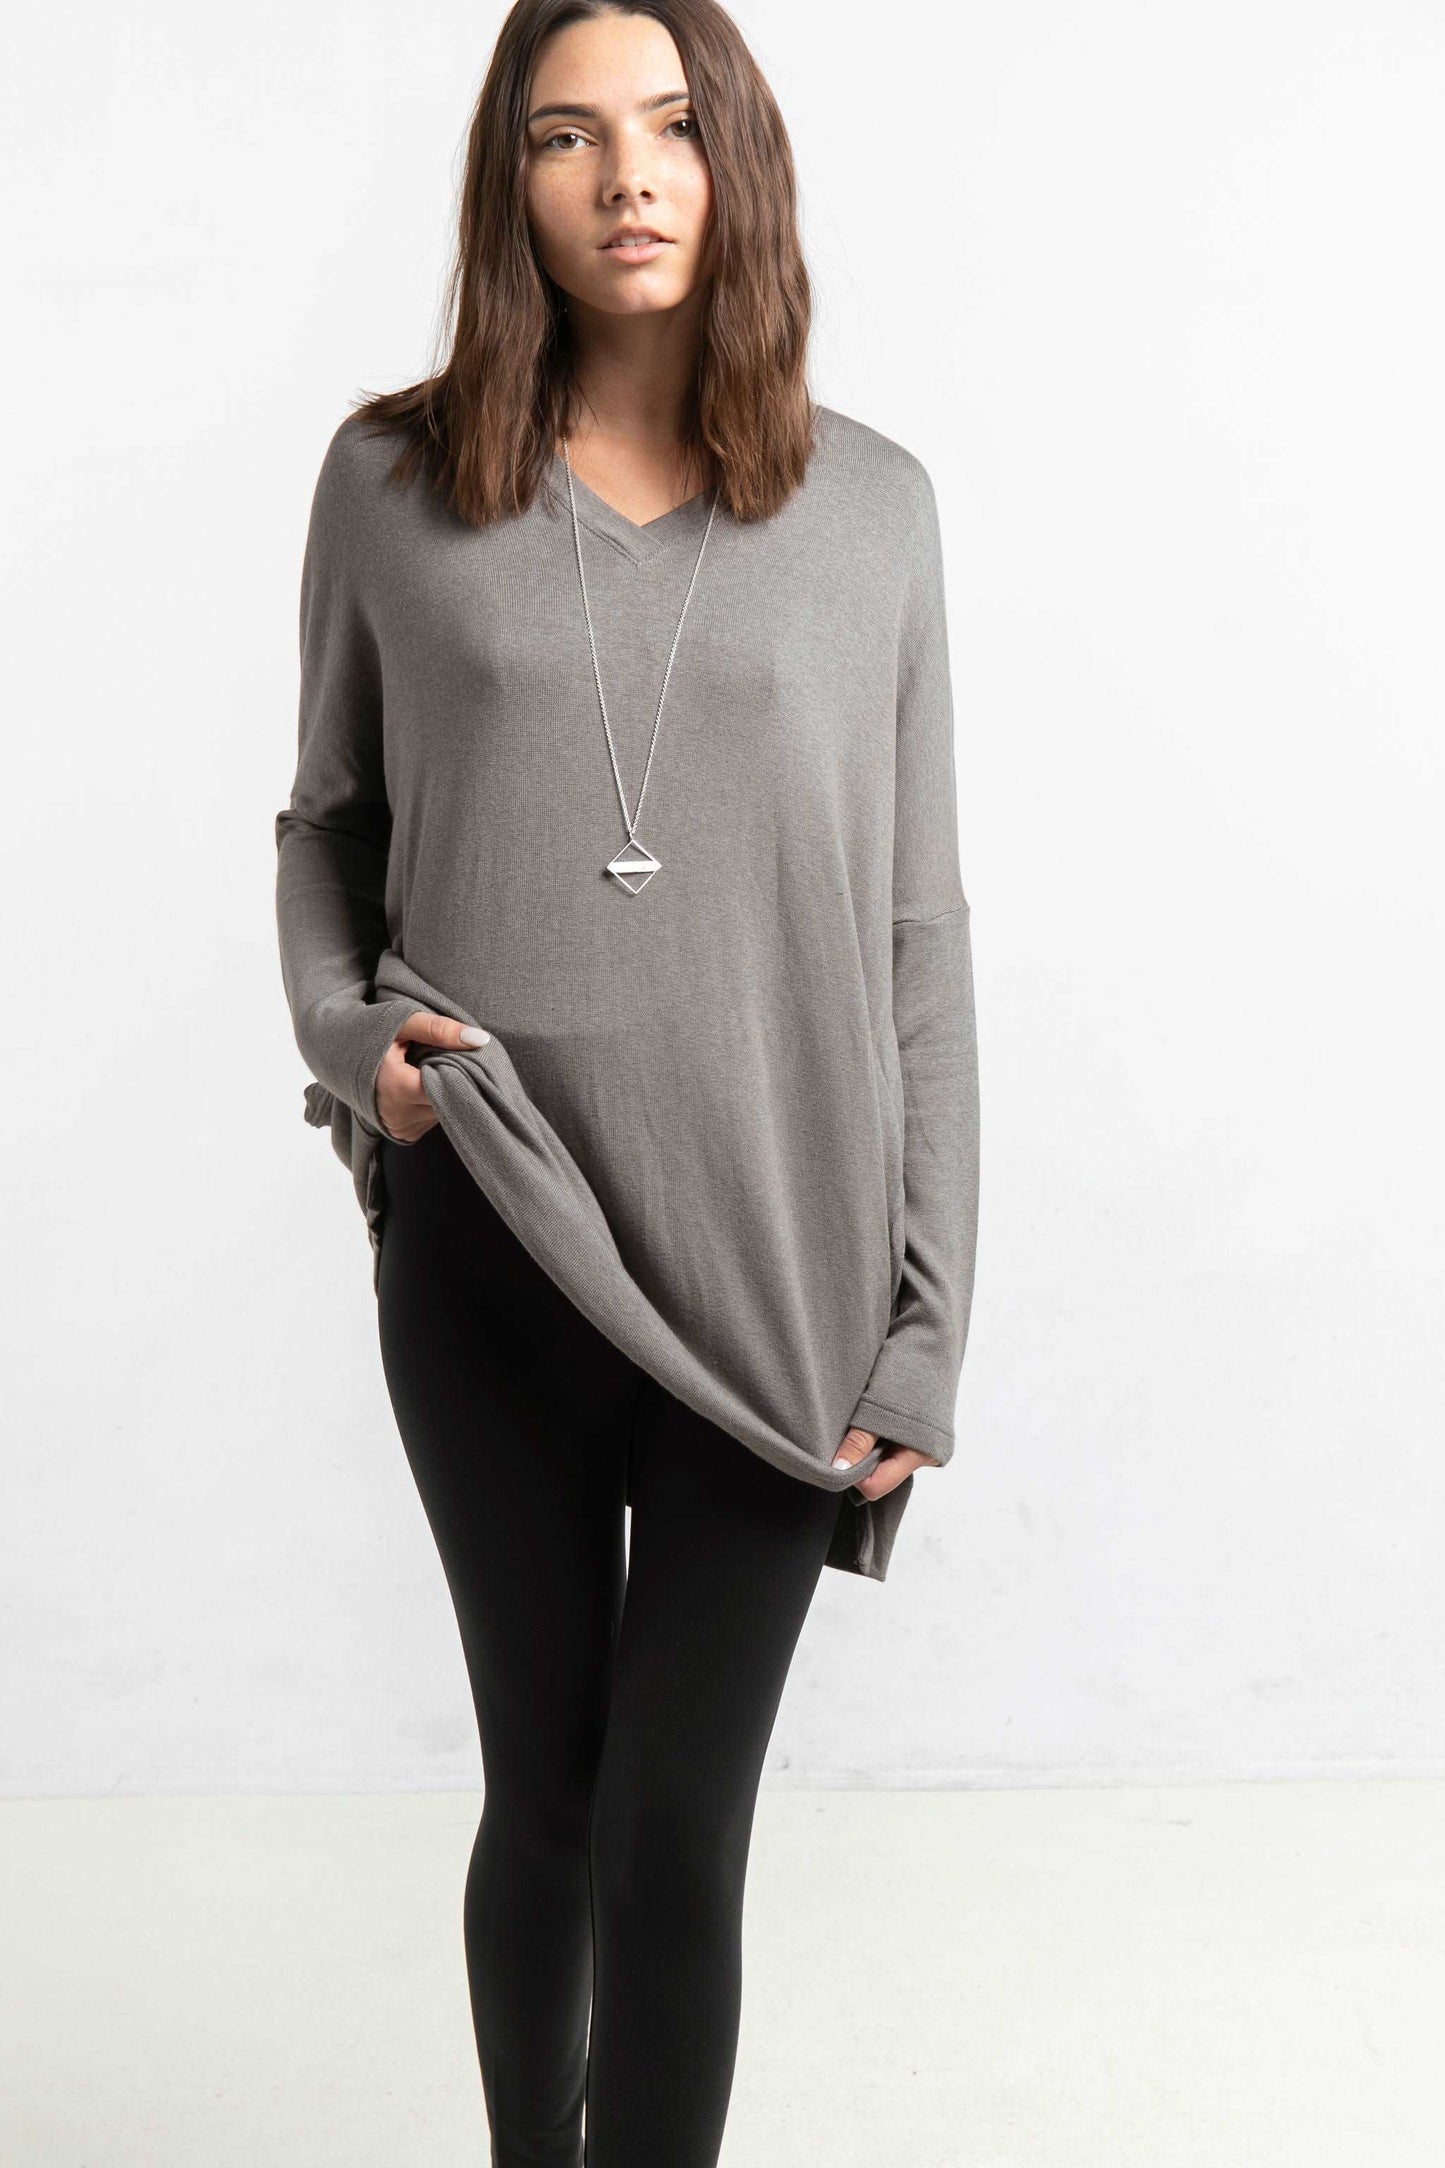 Covet + Keep Collaboration Necklace Silver